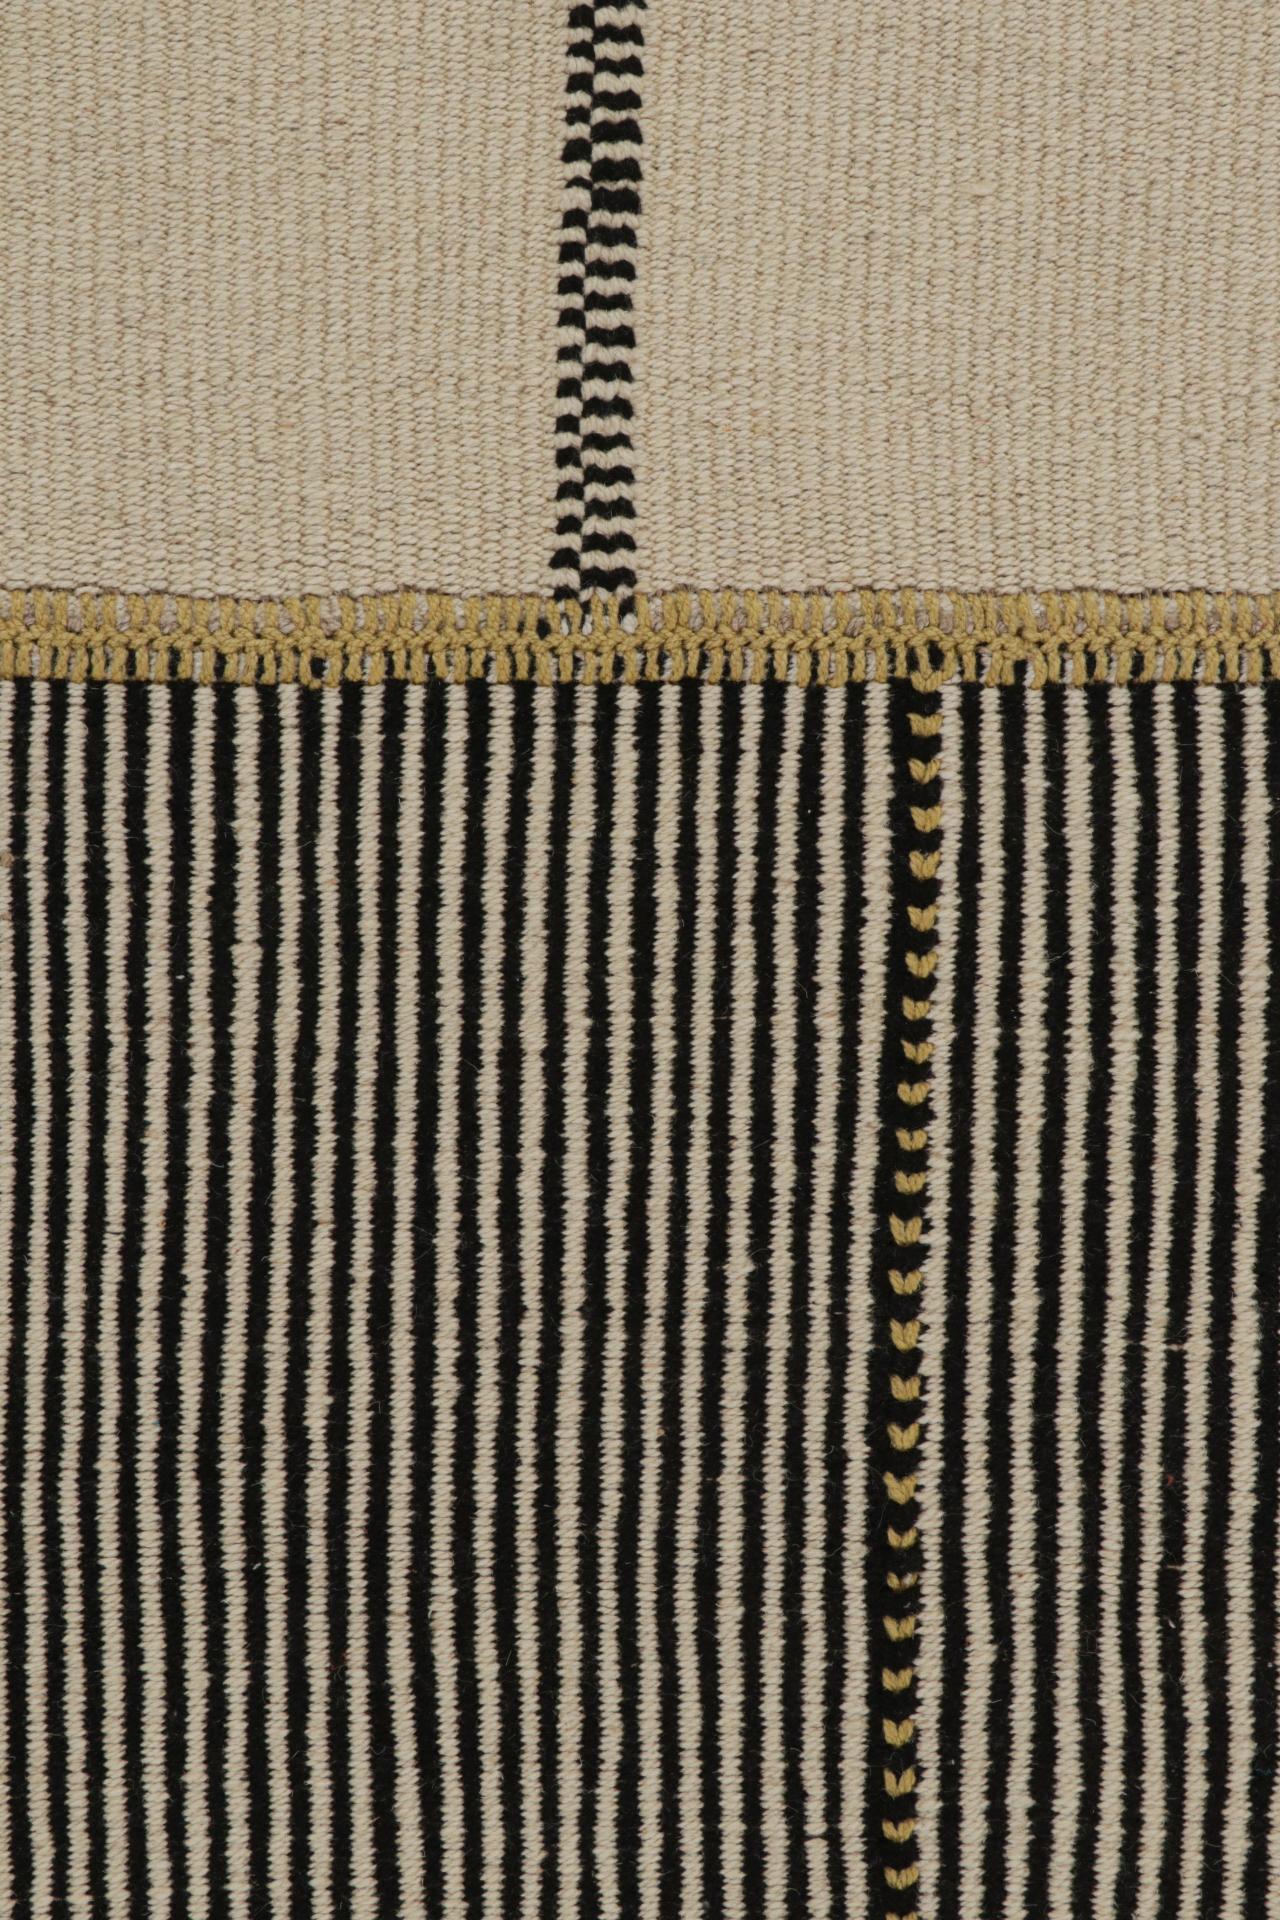 Hand-Woven Rug & Kilim’s Contemporary Runner Kilim, In Black And Beige Tones and Stripes For Sale